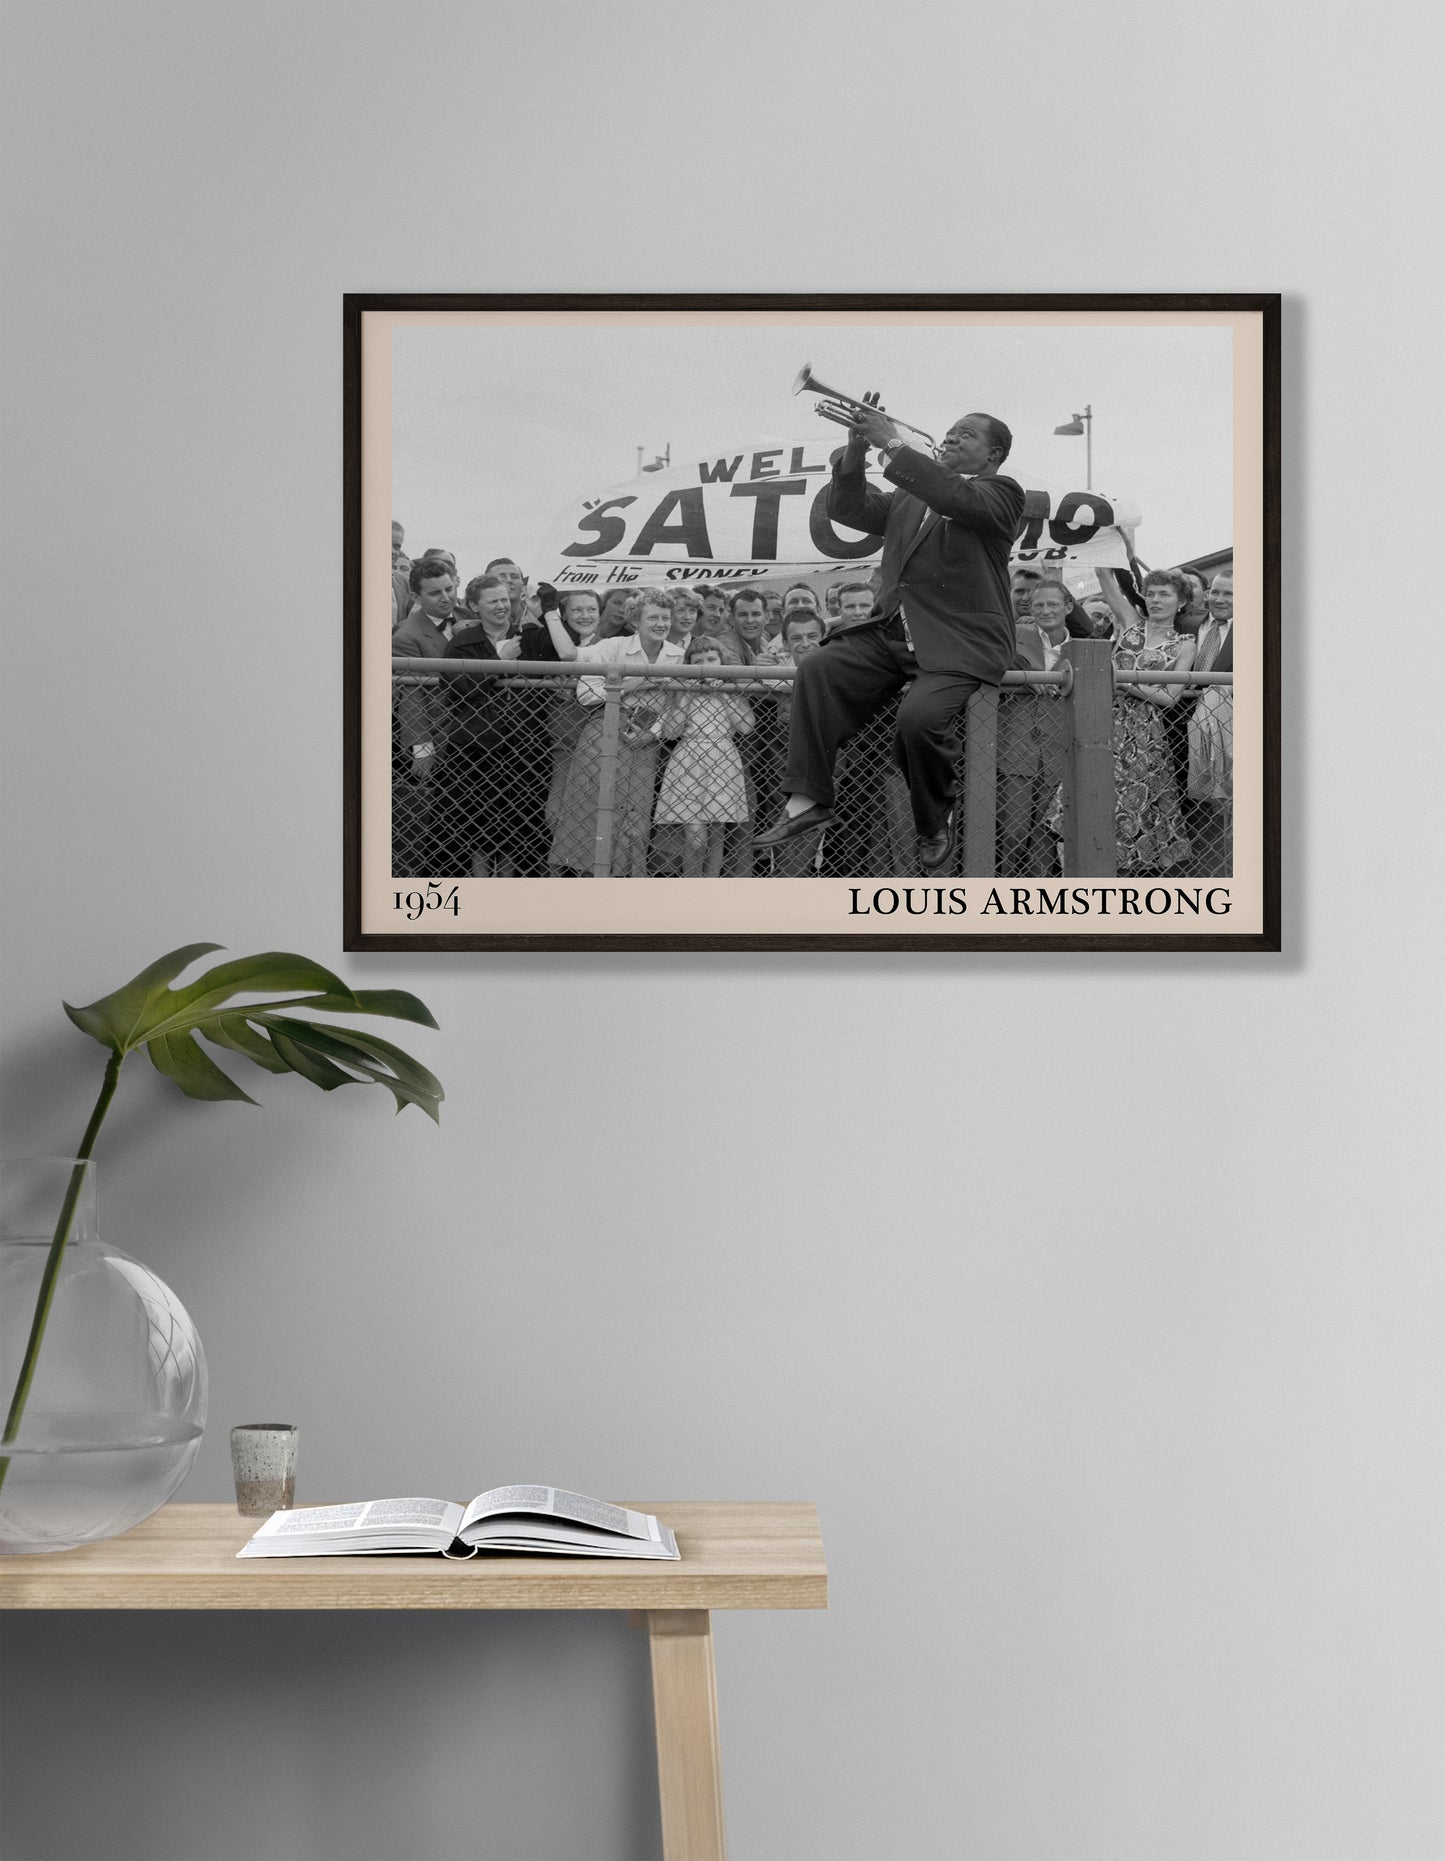 1954 picture of Louis Armstrong playing his trumpet sat on a fence. Picture crafted into a cool black framed jazz print, with an off-white border. Poster is hanging on a grey living room wall